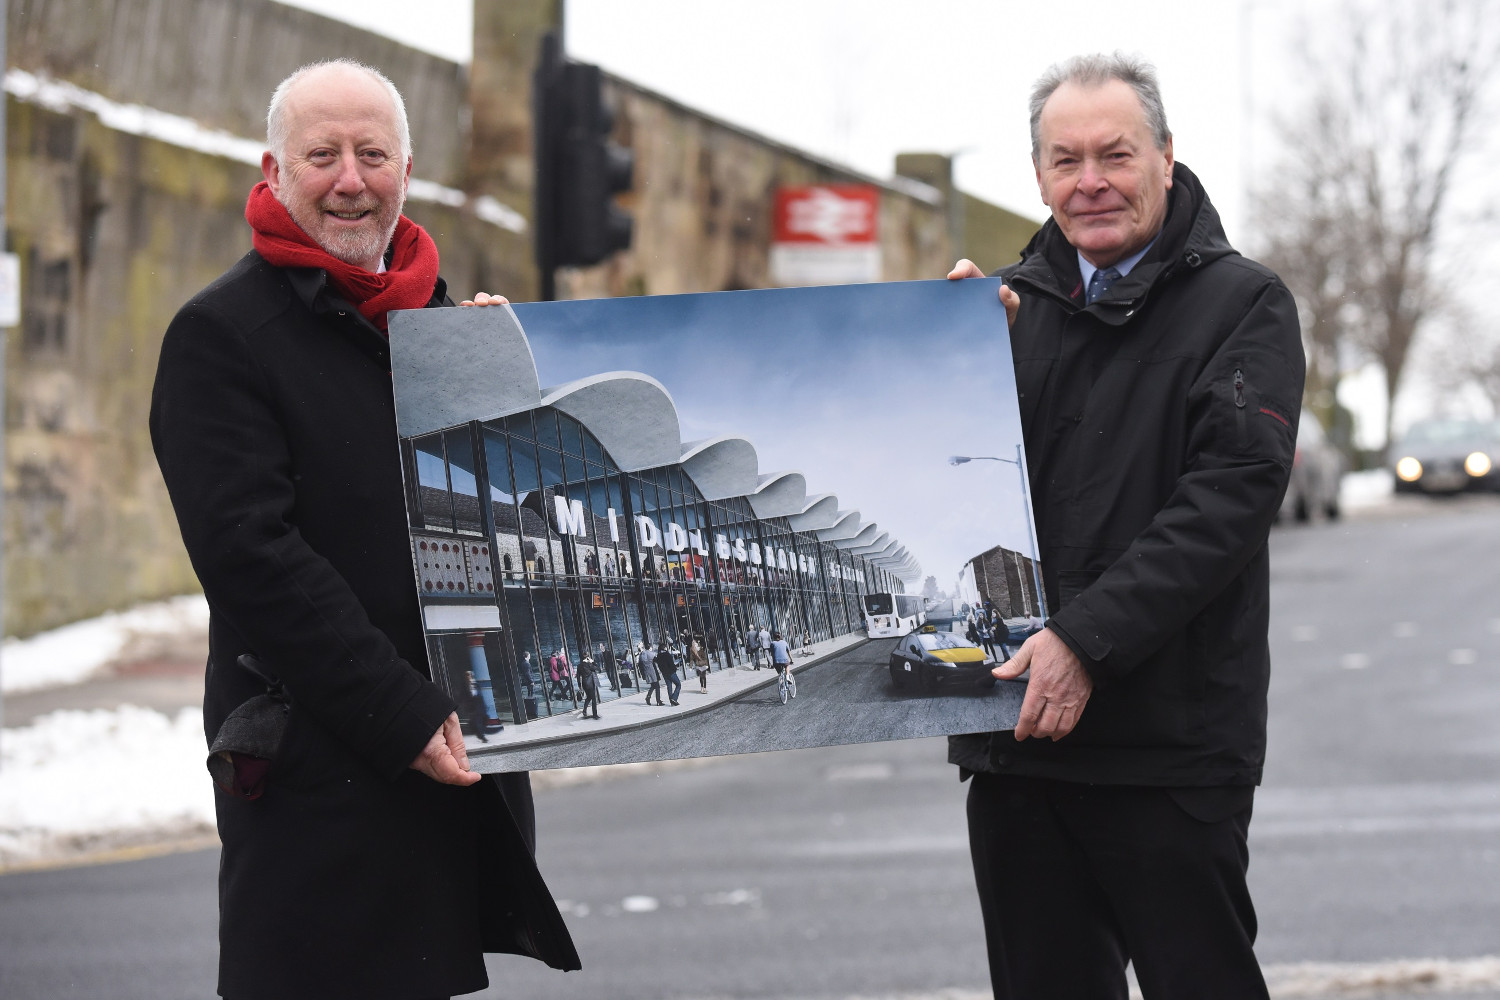 Full steam ahead for Middlesbrough’s ‘destination station’